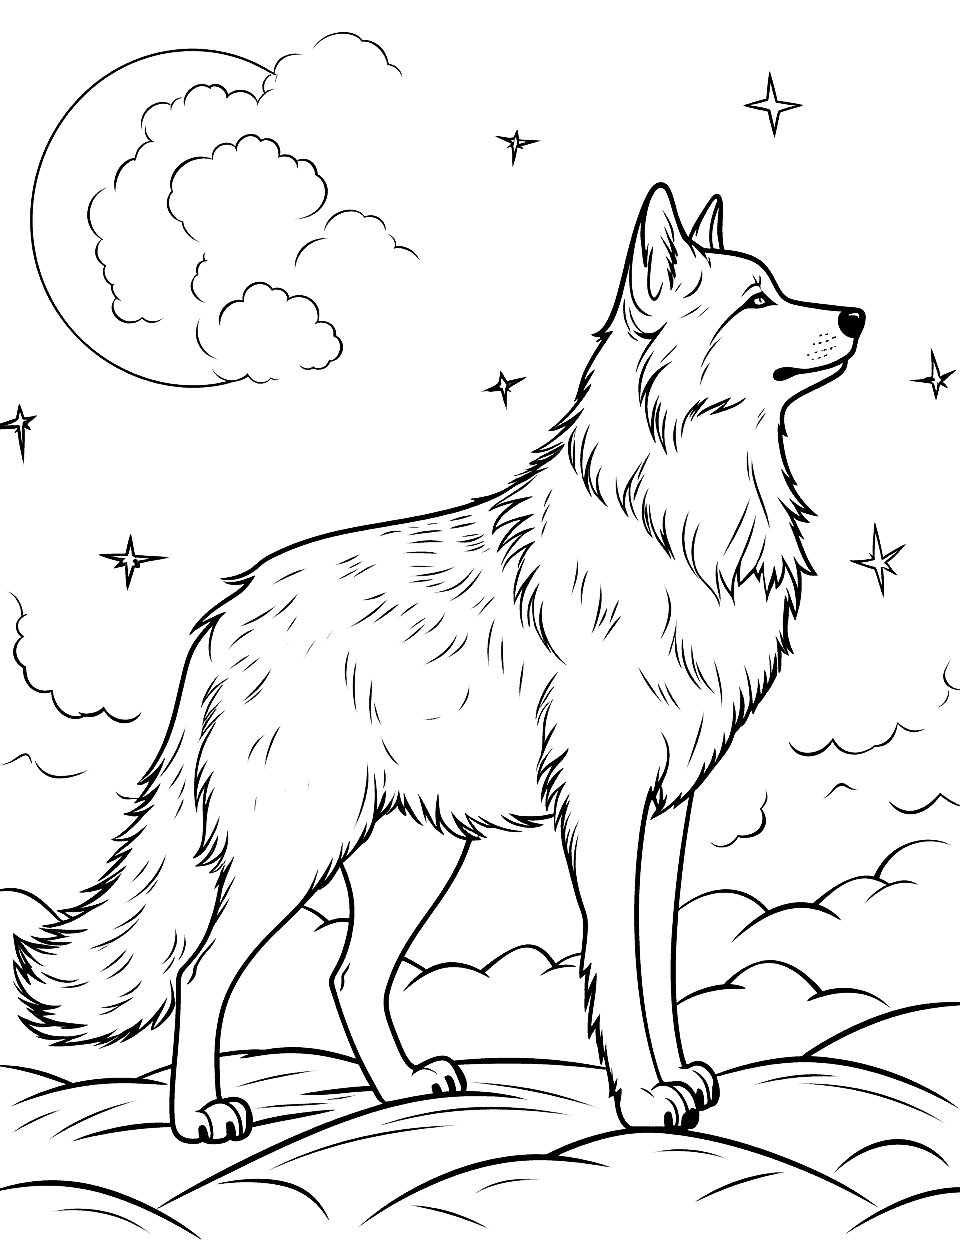 Elder Wolf and Stars Coloring Page - An older, wise wolf gazing at a sky full of shooting stars.